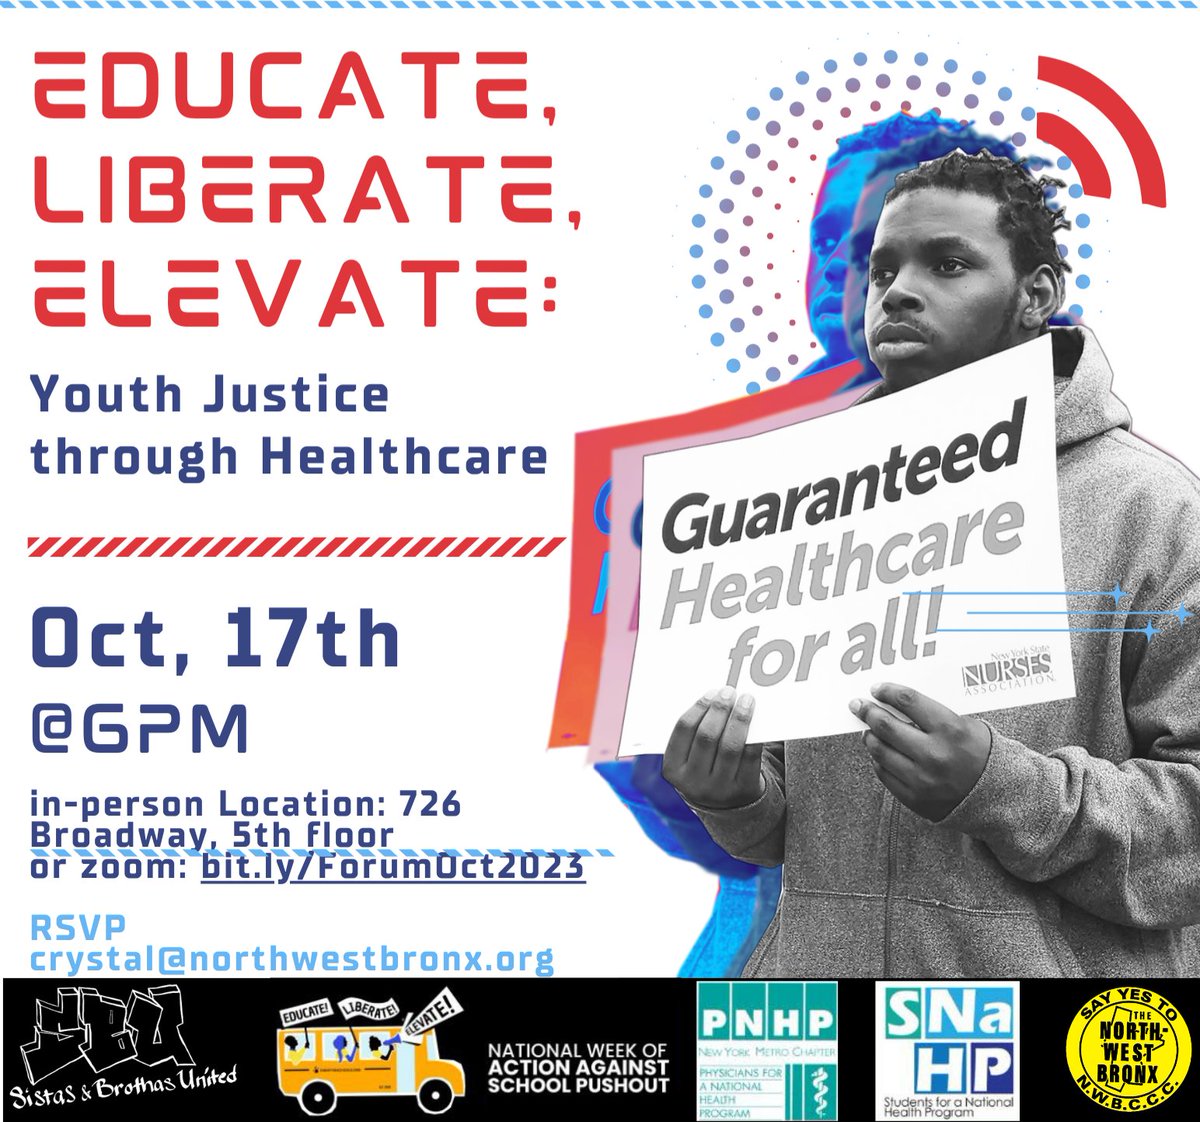 Our health is determined by where we live, learn, work & play. Our racist, ableist & classist school discipline system is impacting student educational AND health outcomes.
RSVP: bit.ly/ForumOct2023 & join us TONIGHT to #EducateLiberateElevate as part of #DSCWoA2023!